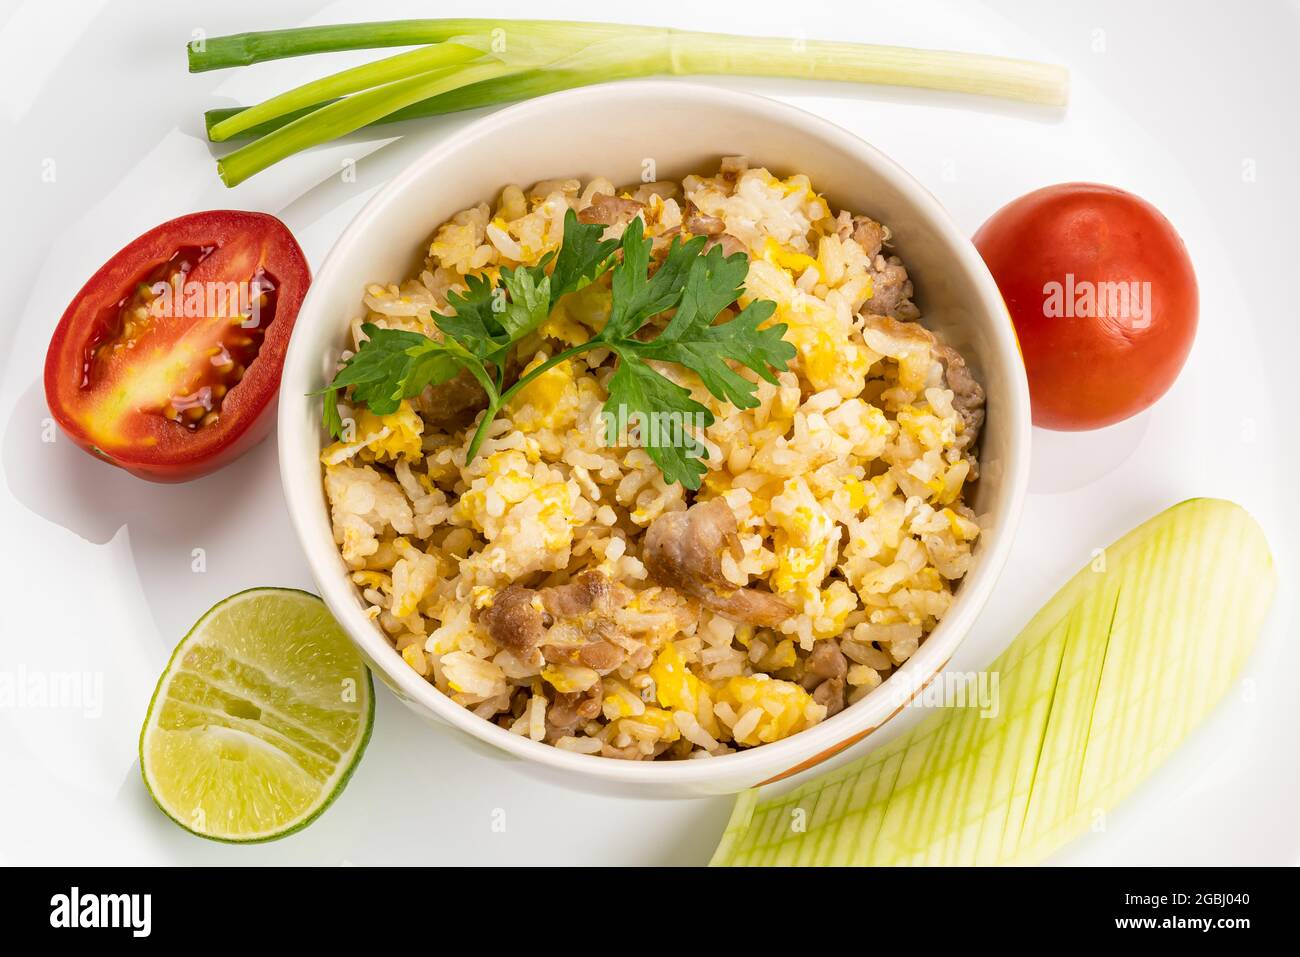 Top view of delicious homemade thai style pork and egg fried rice in ceramic bowl on white ceramic plate with whole and half tomato, sliced cucumber, Stock Photo